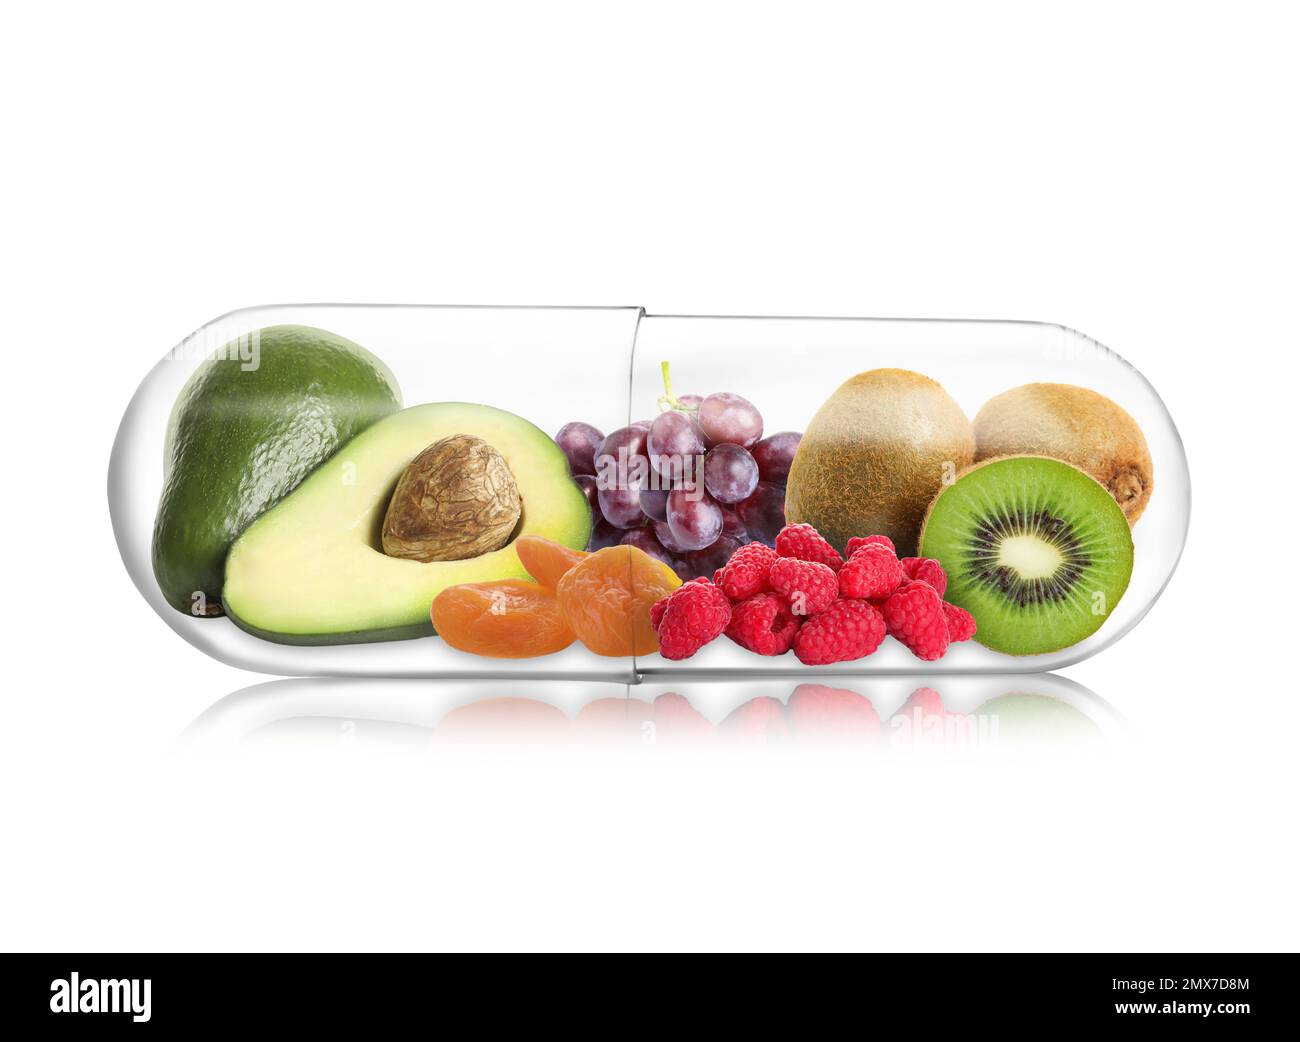 Transparent capsule with different fruits and berries rich in vitamins on white background Stock Photo